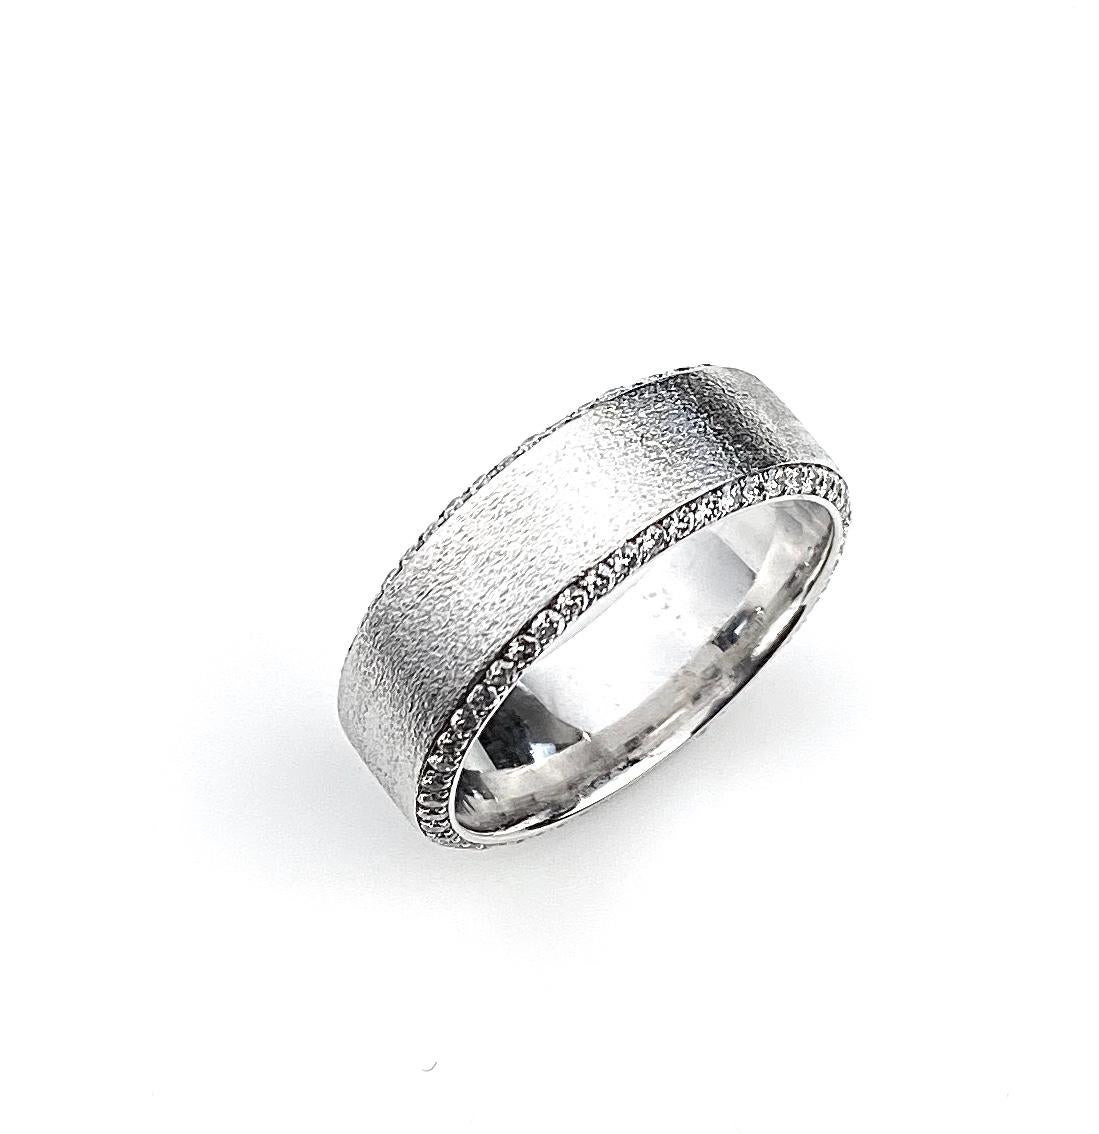 Men's wedding band in 18kt white gold, set with white diamonds on both ring sides on beveled edges. Diamonds are F/G colour and VS/SI1 clarity.  Ring size 12. Finished on top surface with diamond finish.